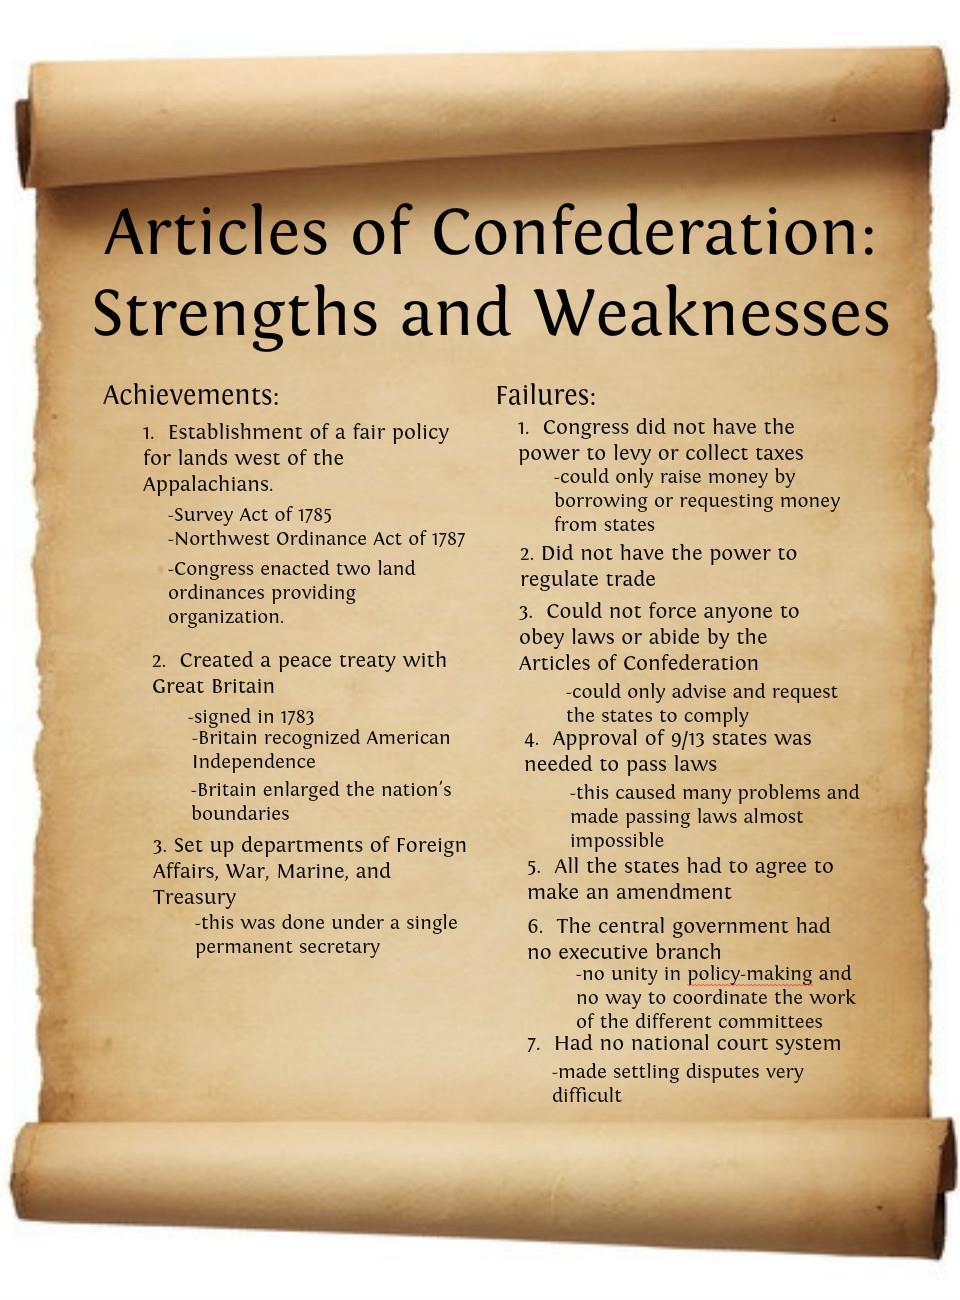 Articles Of Confederation New American government Gave more power to states than the